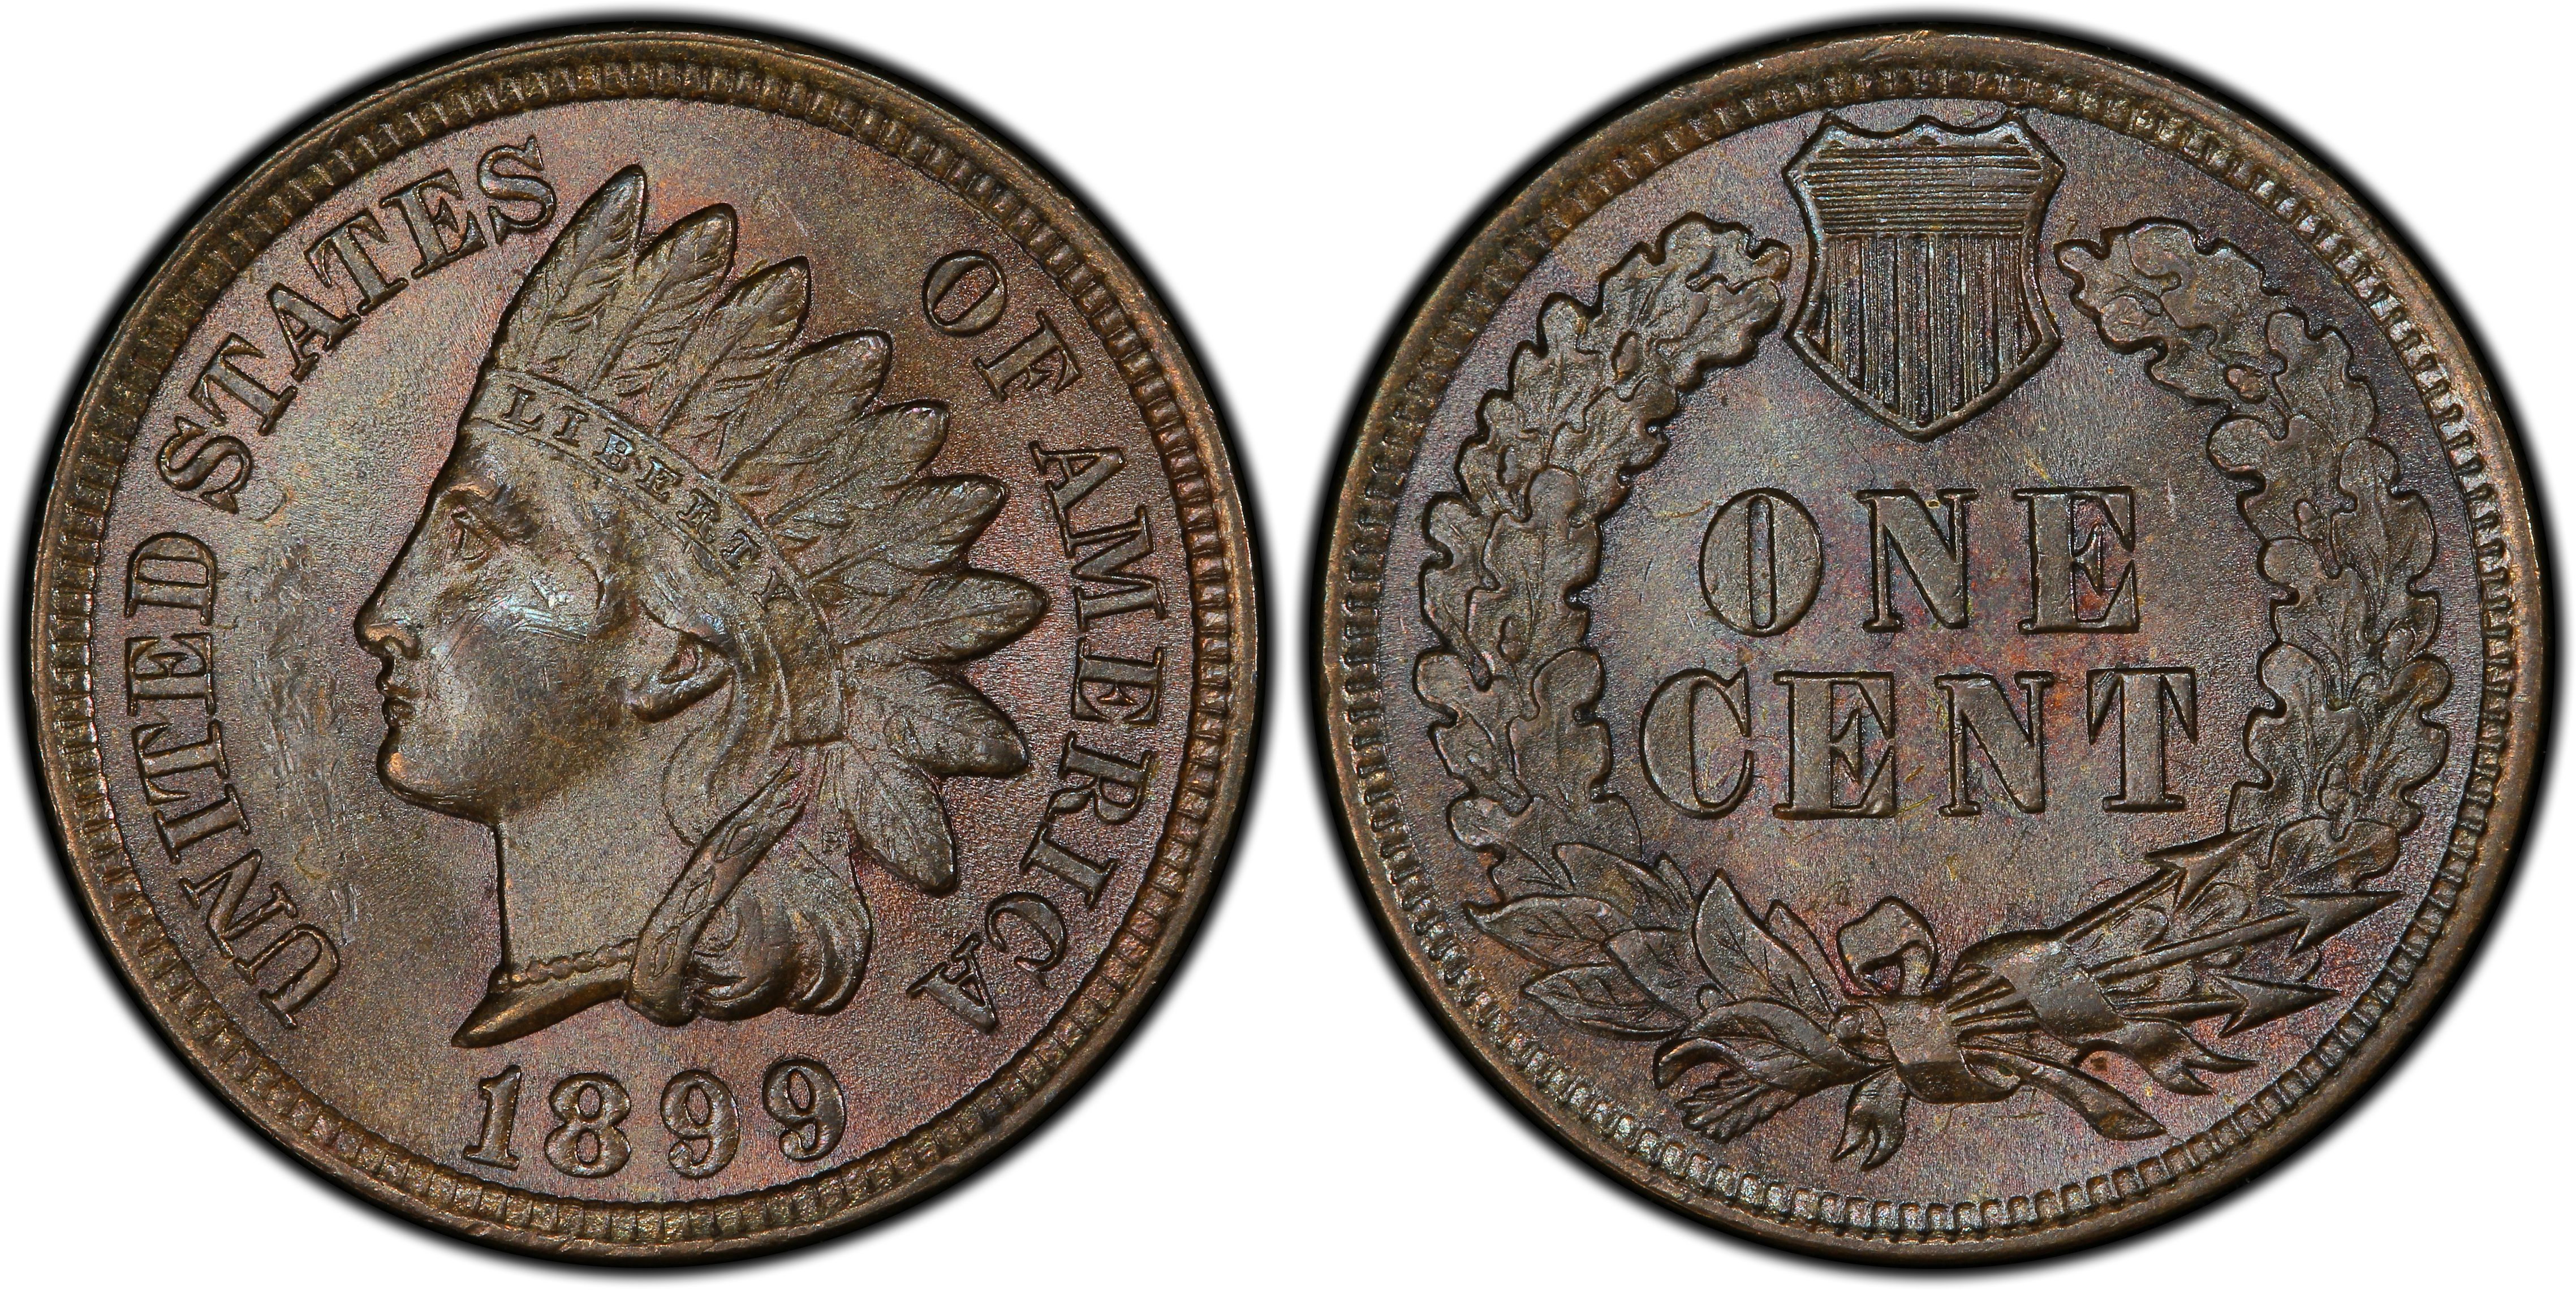 Sold at Auction: 1899 US Indian Head One Cent Coin